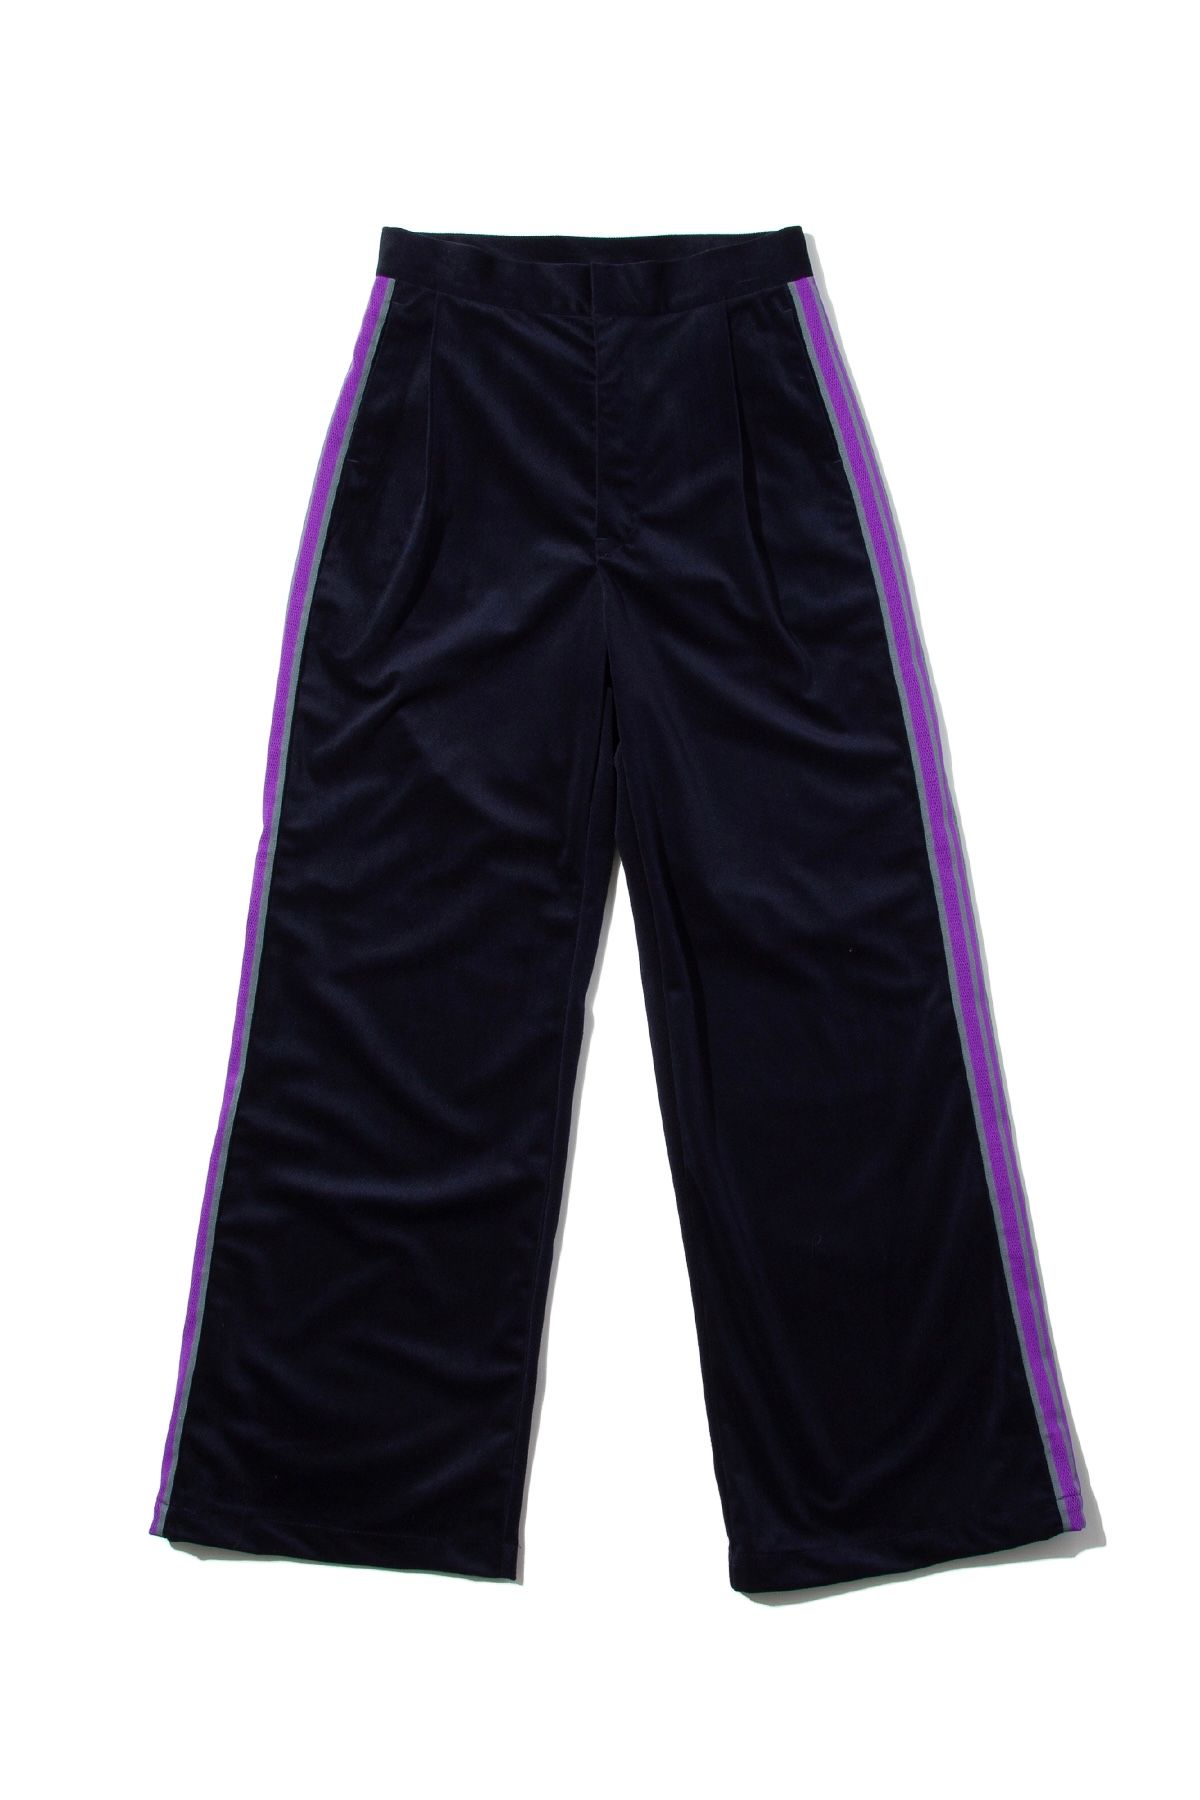 F/CE. - side tape velor trousers -navy- 22aw women | asterisk